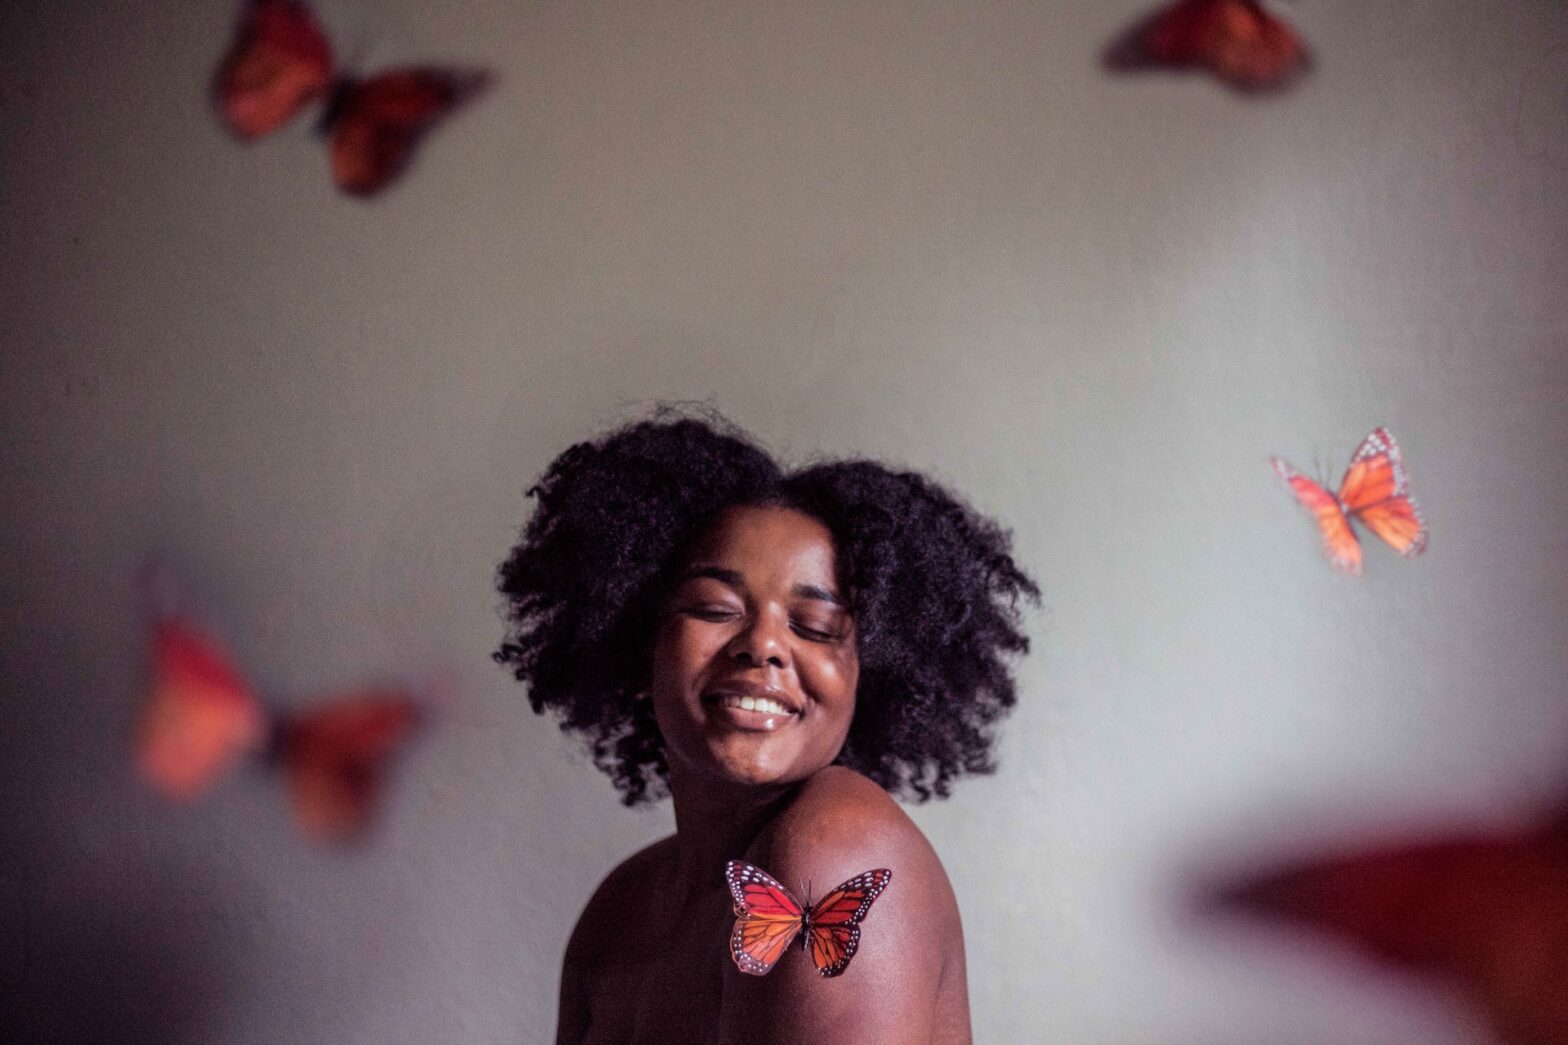 Pap smear on your period. pictured: a young Black woman surrounded by butterflies